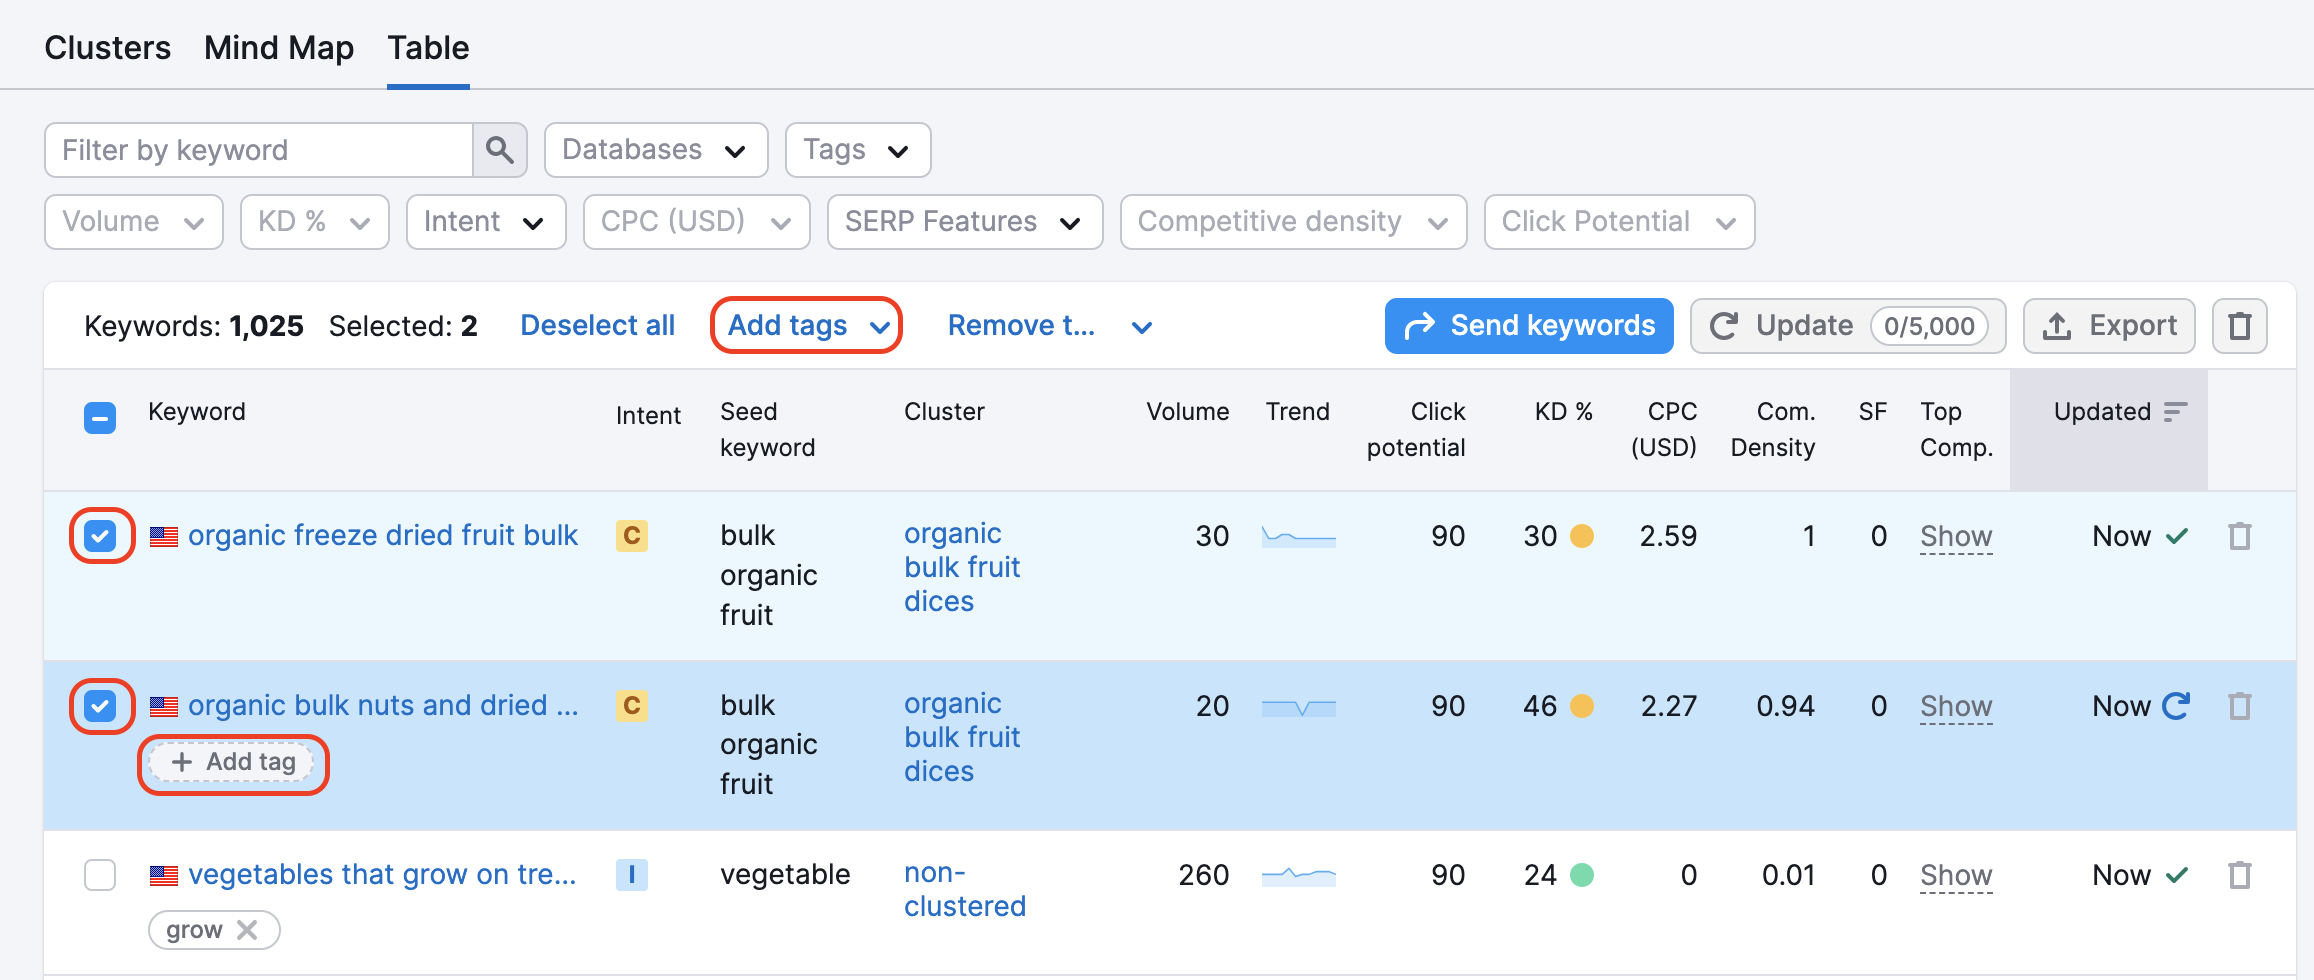 An example of the Table tab in Keyword Manager with red rectangles highlighting the selected keyword, the Add tag button that appears under a keyword when you hover over it, and the Add tags button at the top of the table. 